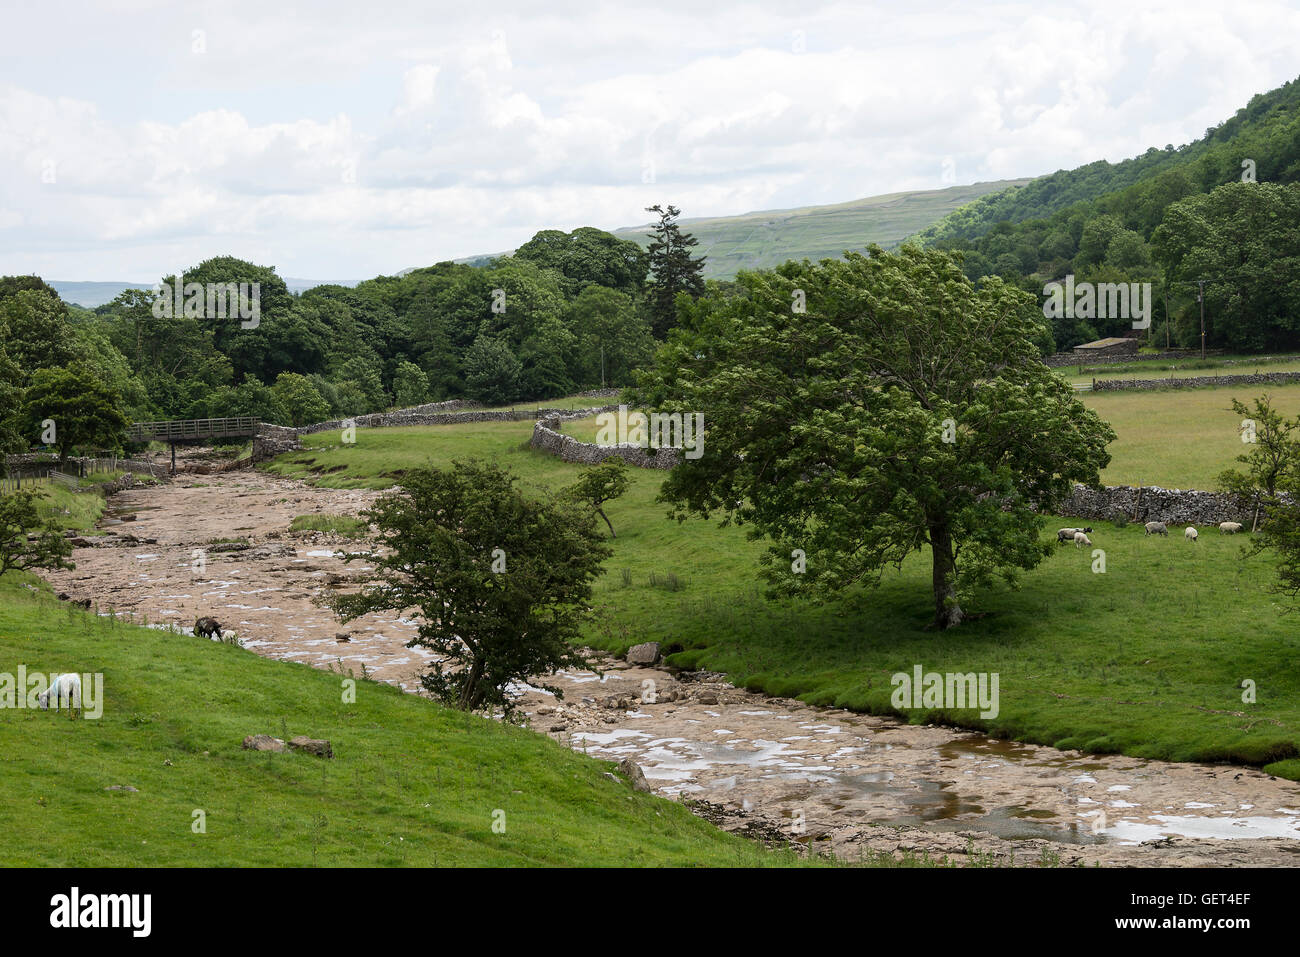 The River Skirfare in Littondale near Halton Gill in The Yorkshire Dales National Park Yorkshire England United Kingdom UK Stock Photo